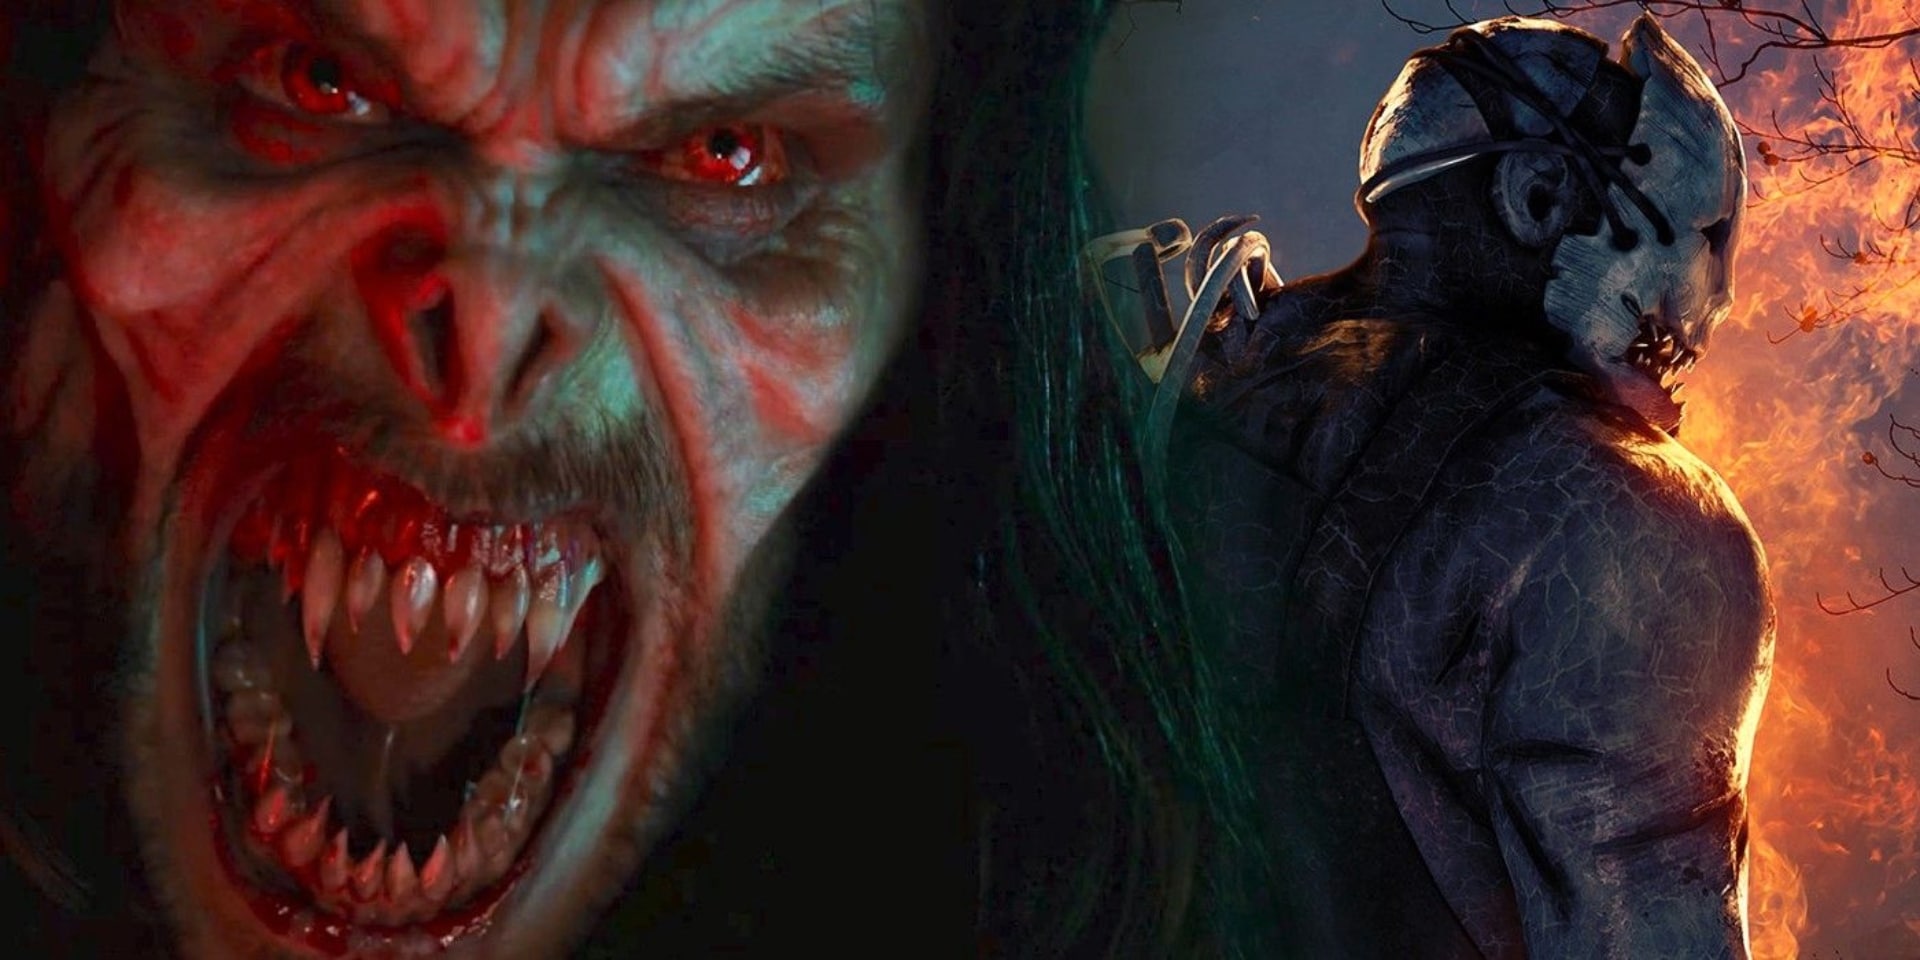 Dead-by-Daylight-Morbius-Chapter-Pitched-By-Fan-GamersRD (1)